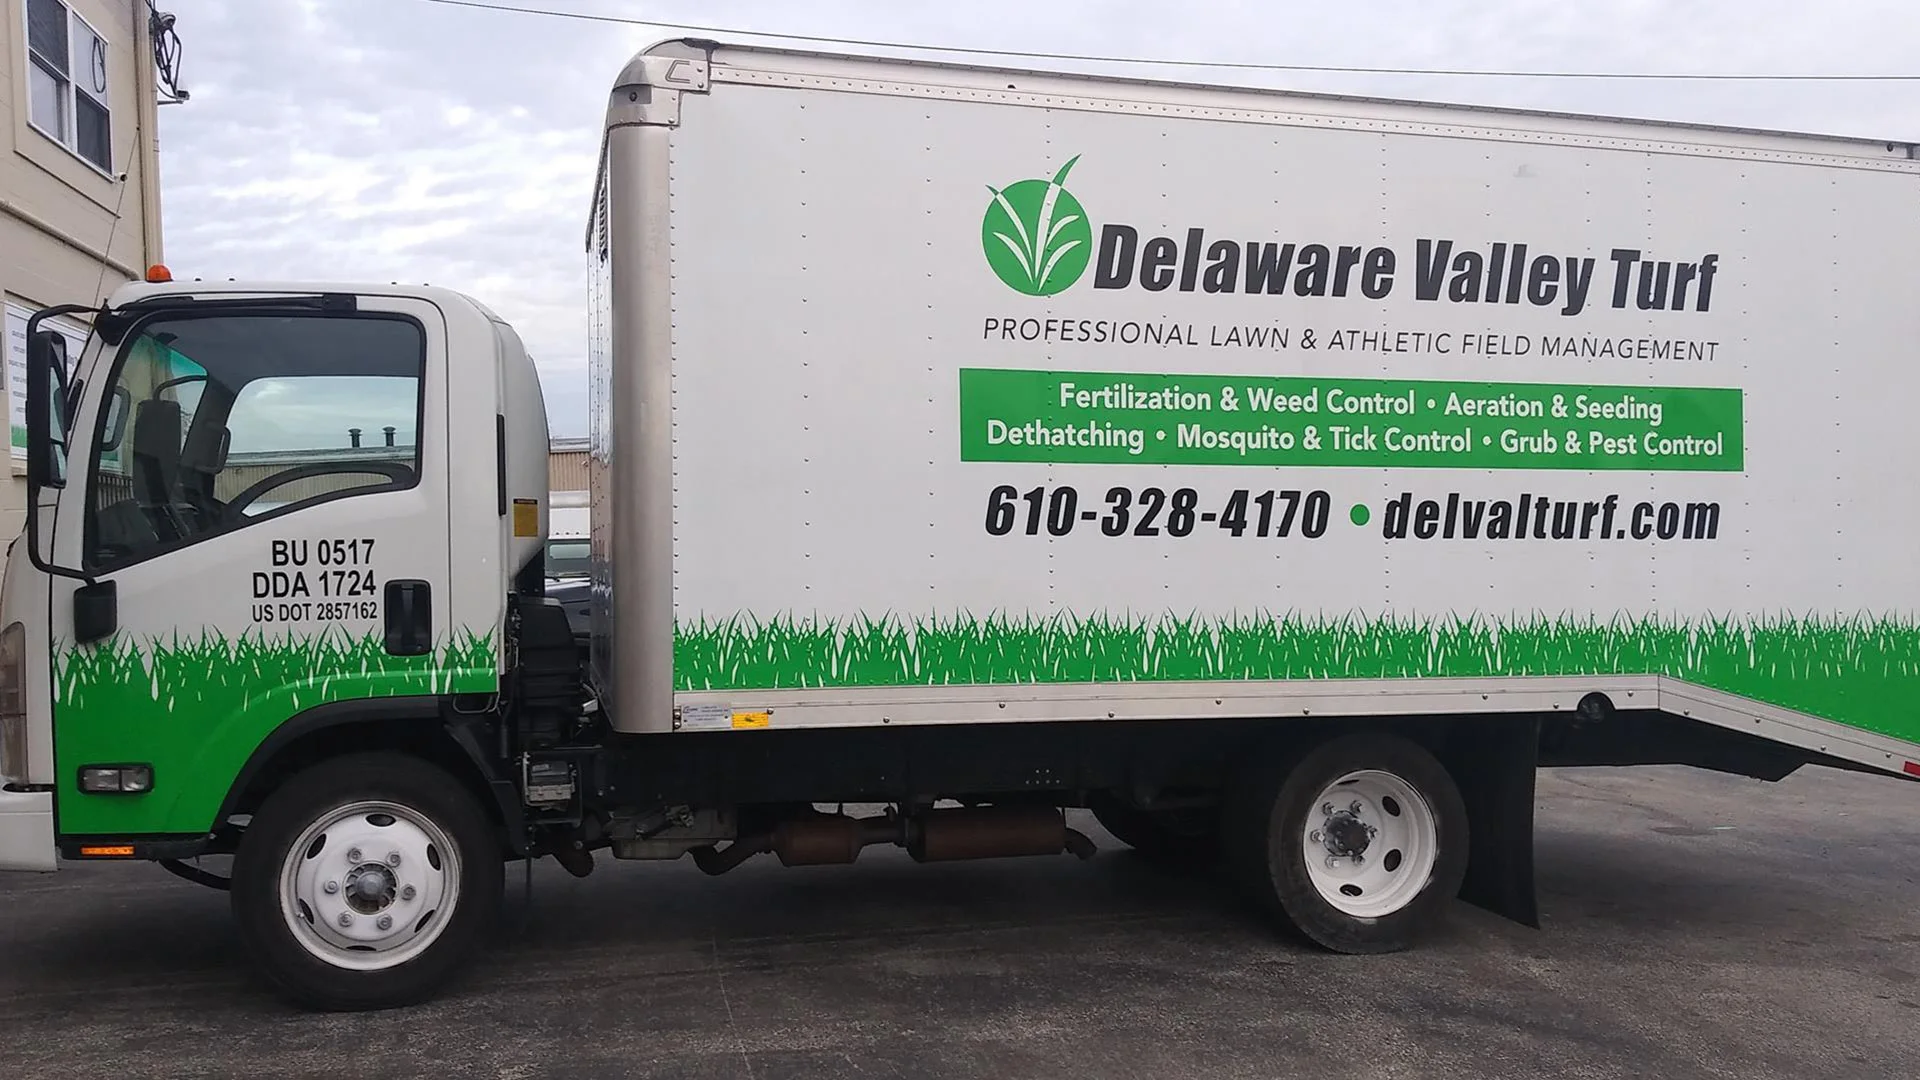 A Delaware Valley Turf truck parked at a home in Pennsylvania.